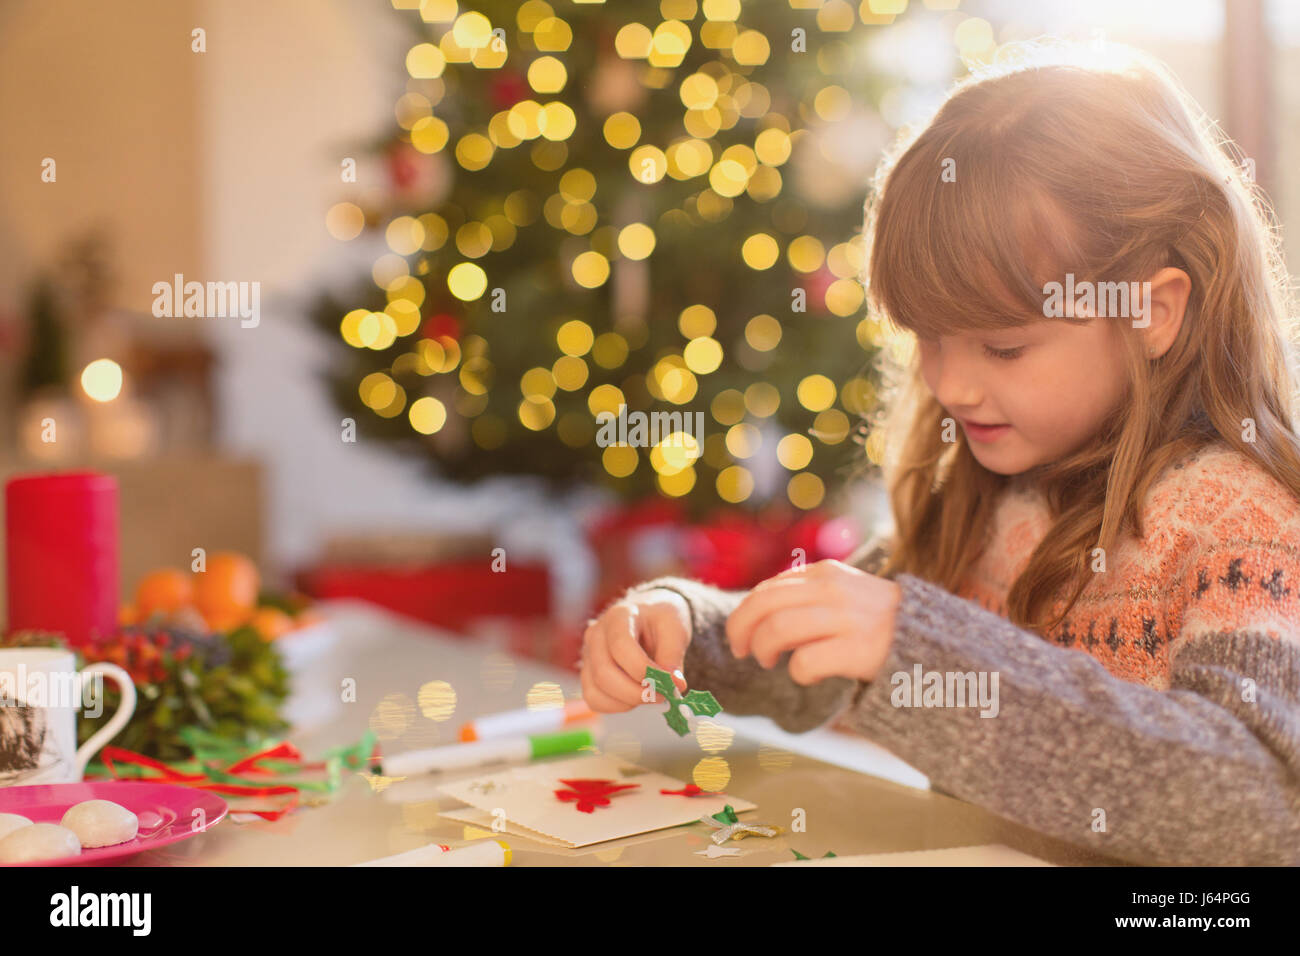 Girl making Christmas decorations at table Stock Photo